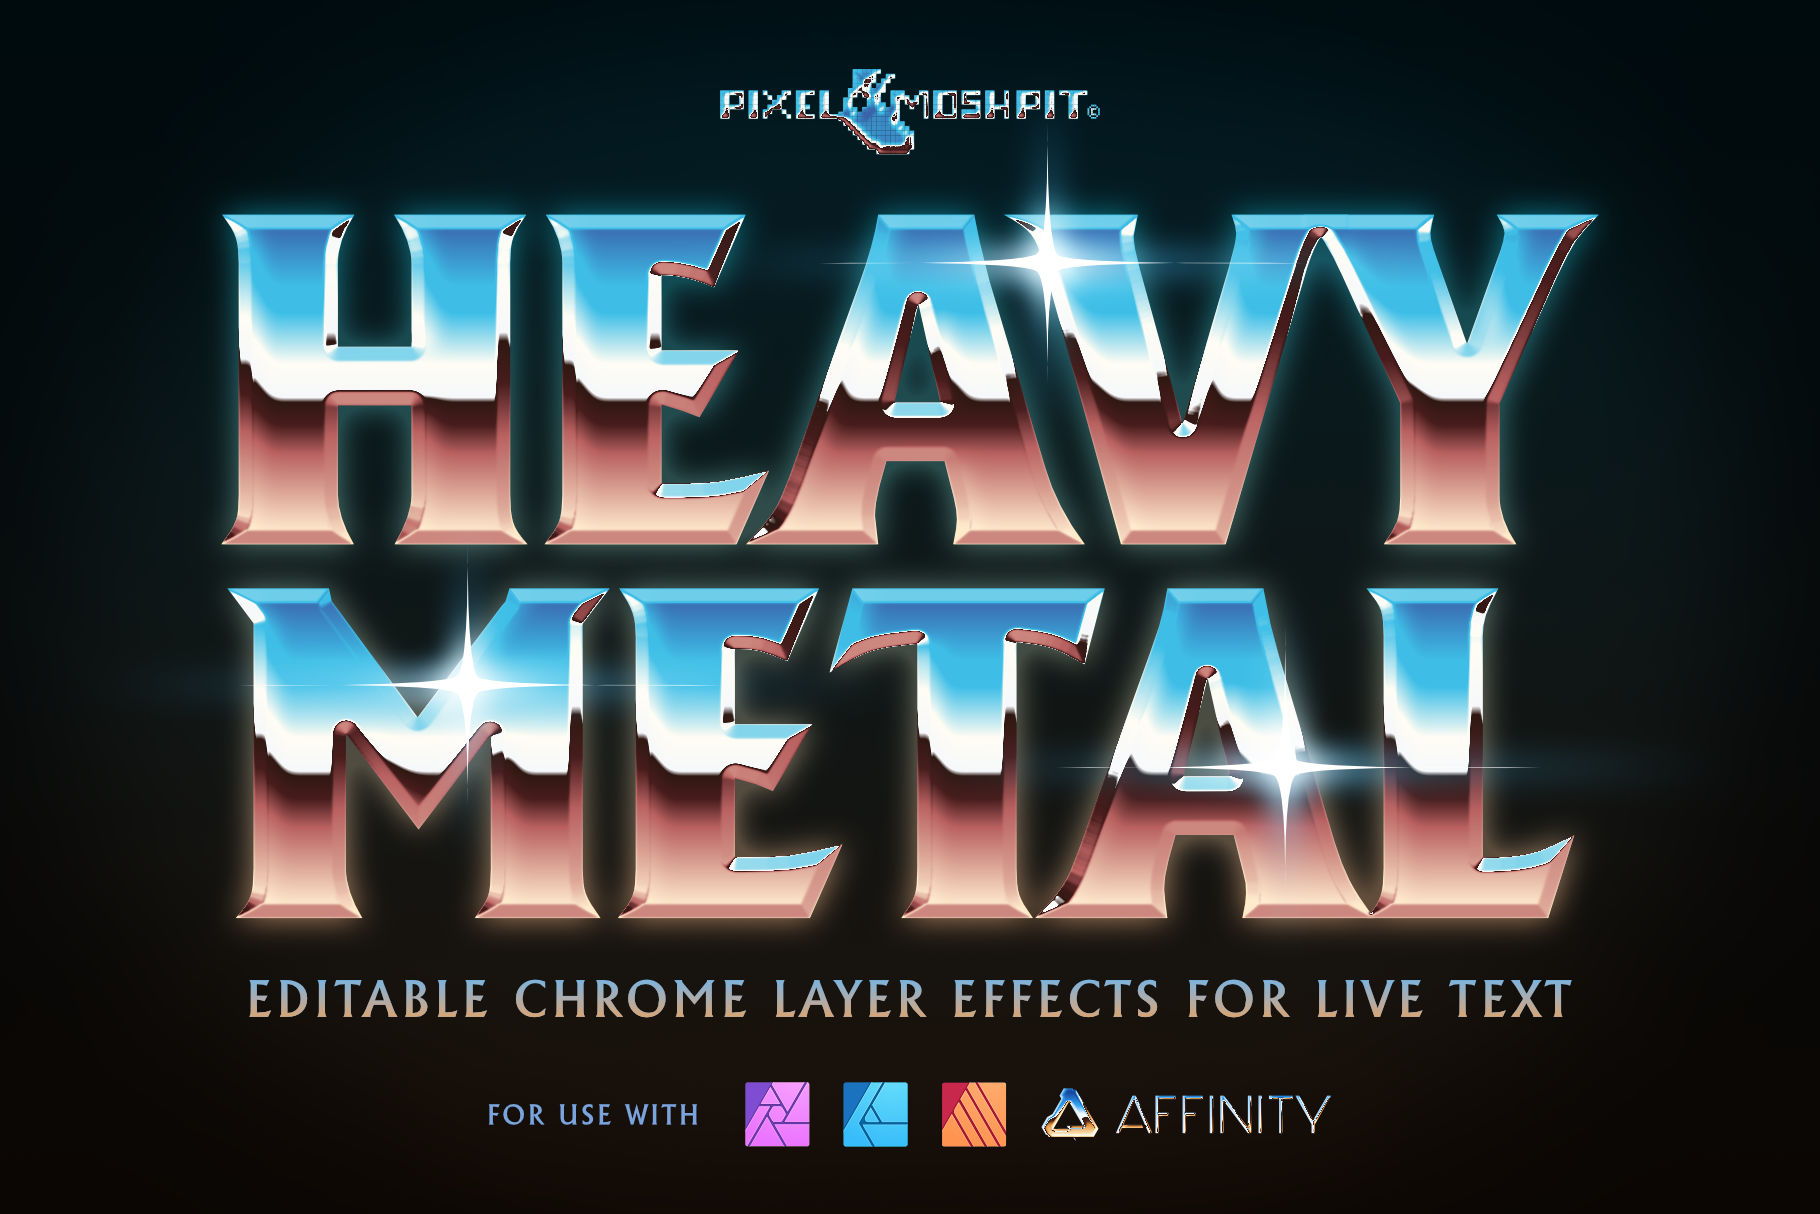 Heavy Metal Chrome Layer effects for Live Text, Affinity Photo Layer Styles Chrome